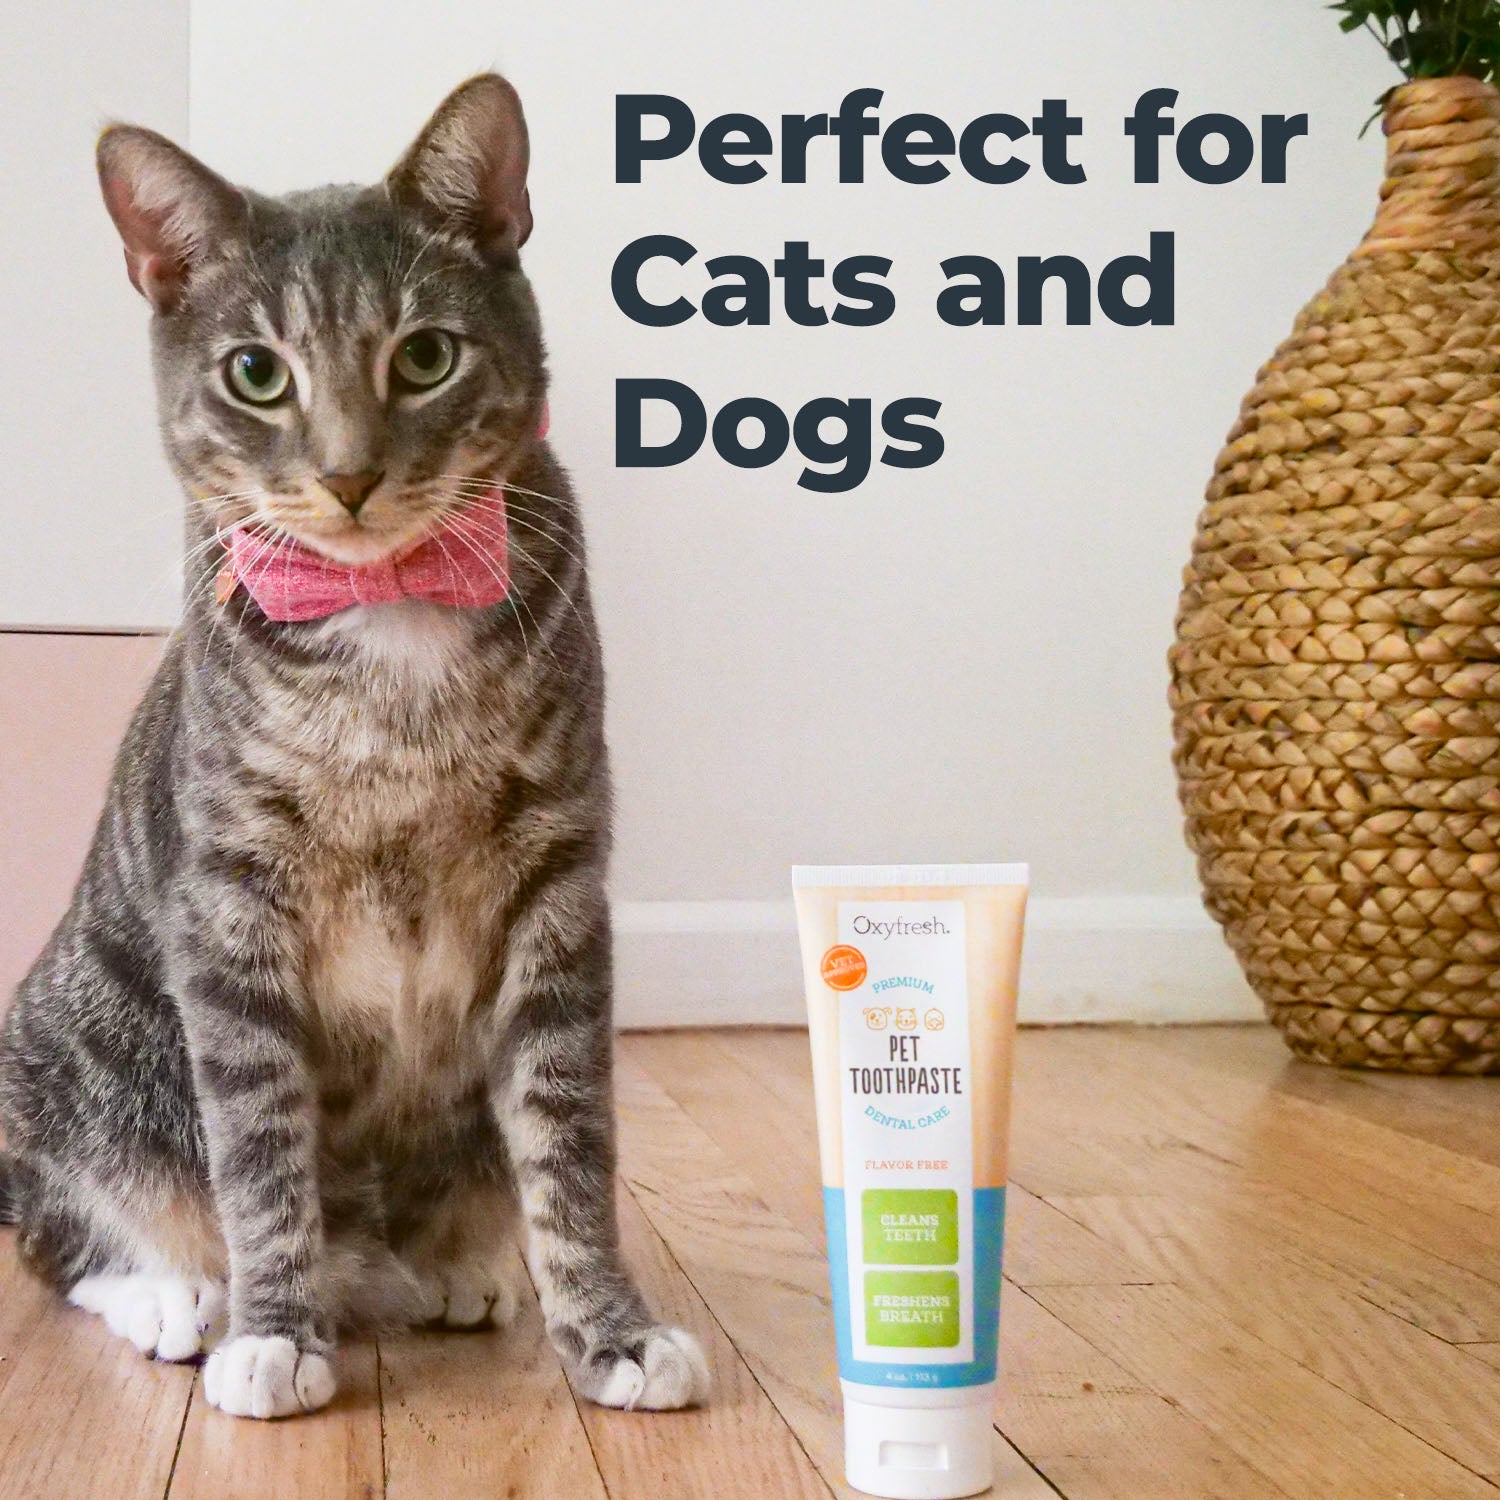 cat with pink bow tie and green eyes next to a tube of oxyfresh pet toothpaste it's perfect for cats and dogs